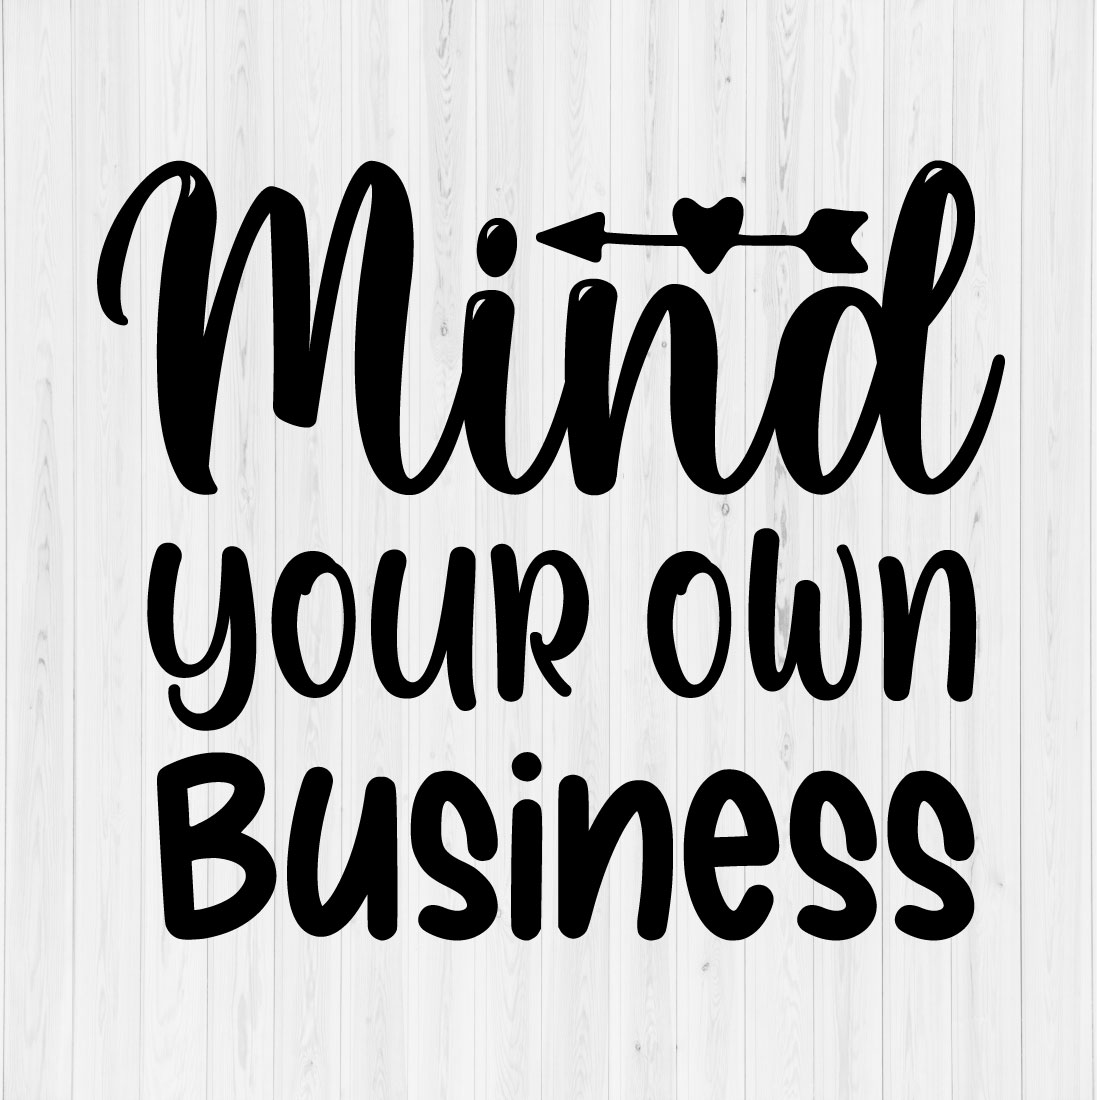 Mind your own Business cover image.